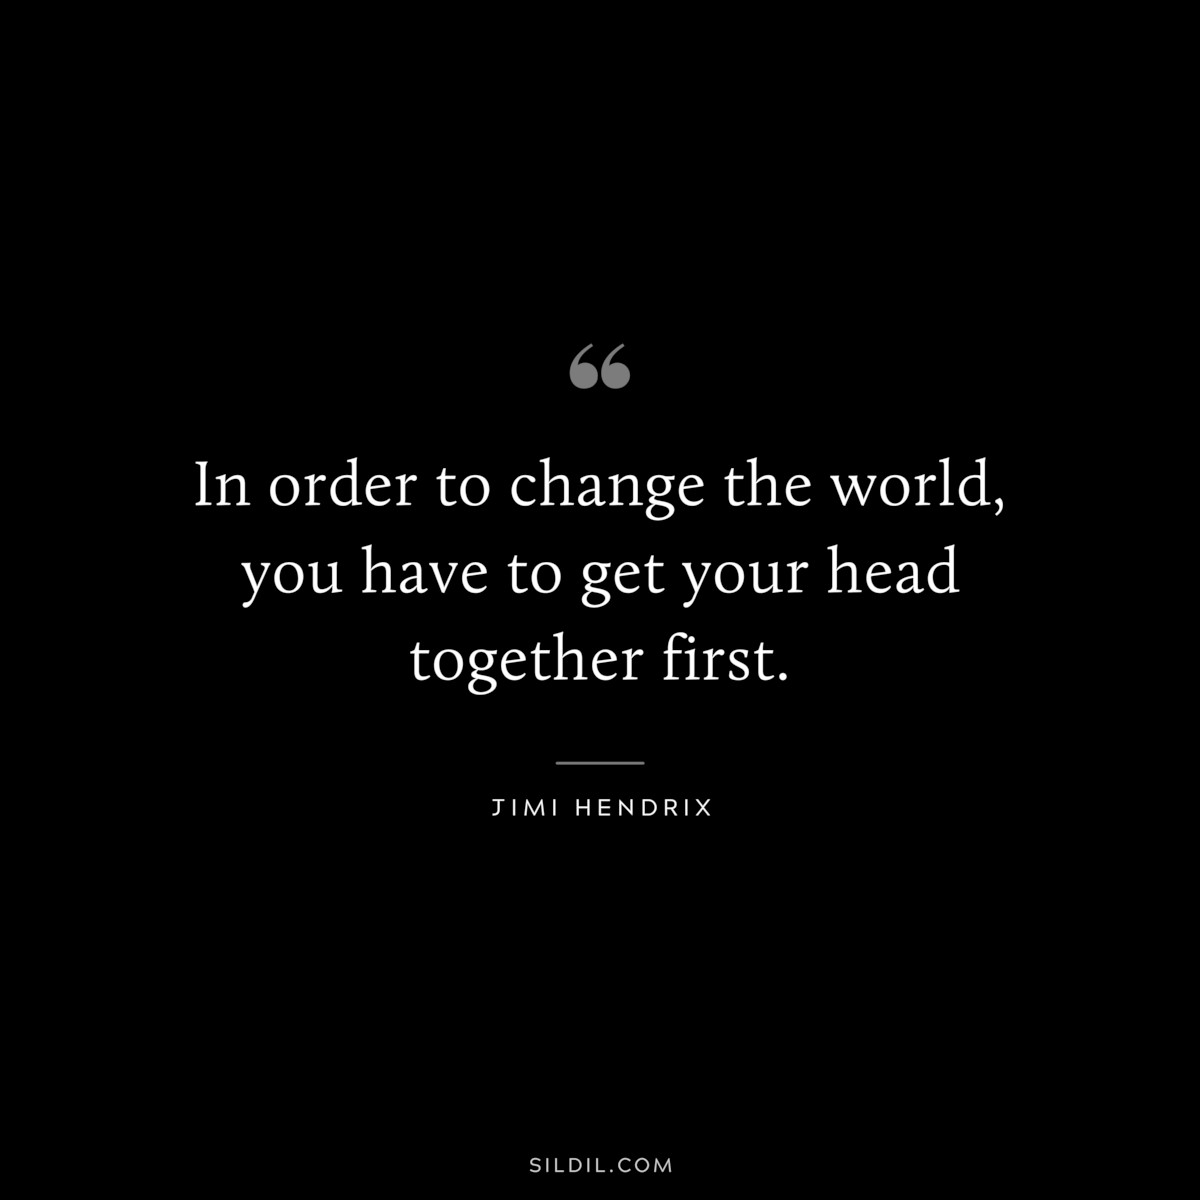 In order to change the world, you have to get your head together first. ― Jimi Hendrix